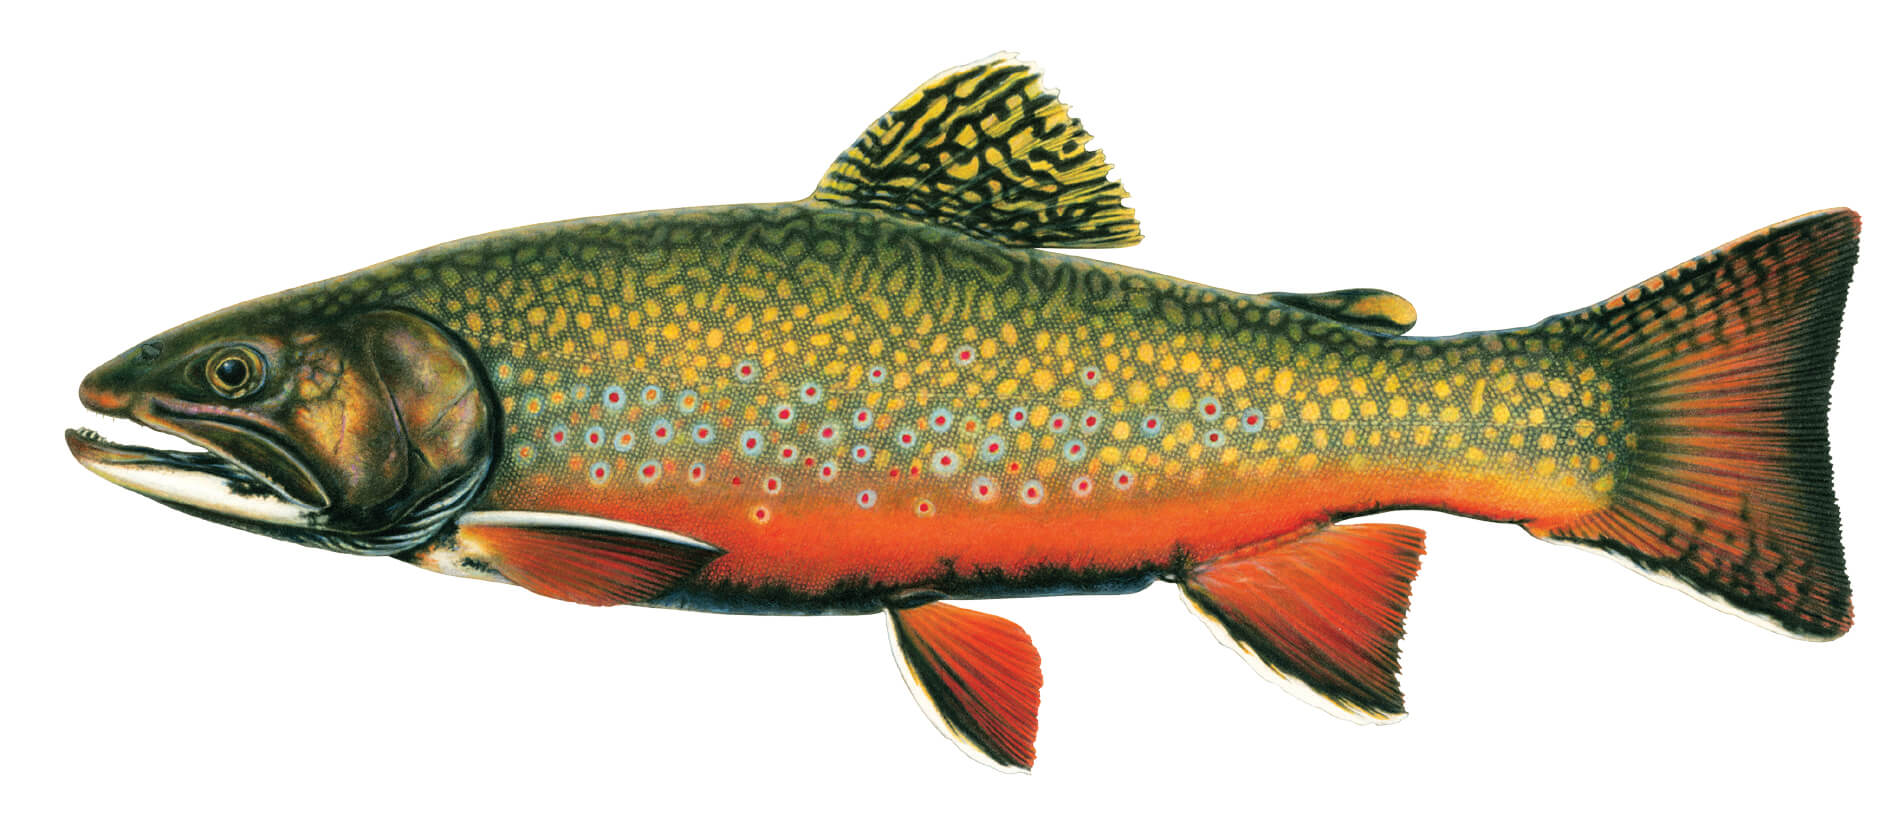 When is a trout not a trout?